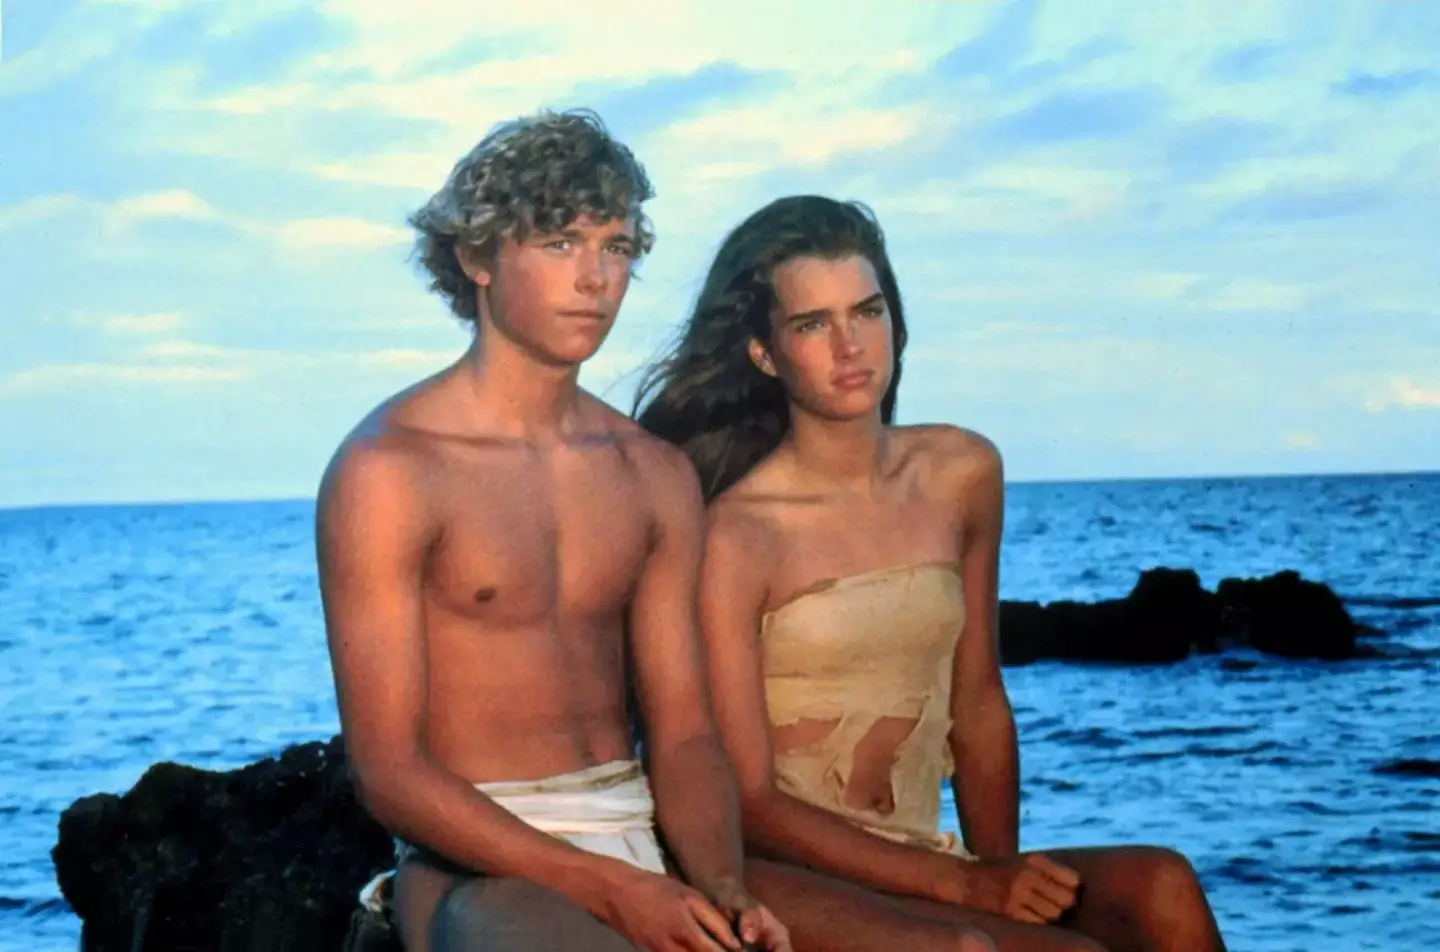 The pair were just teenagers when The Blue Lagoon was made.